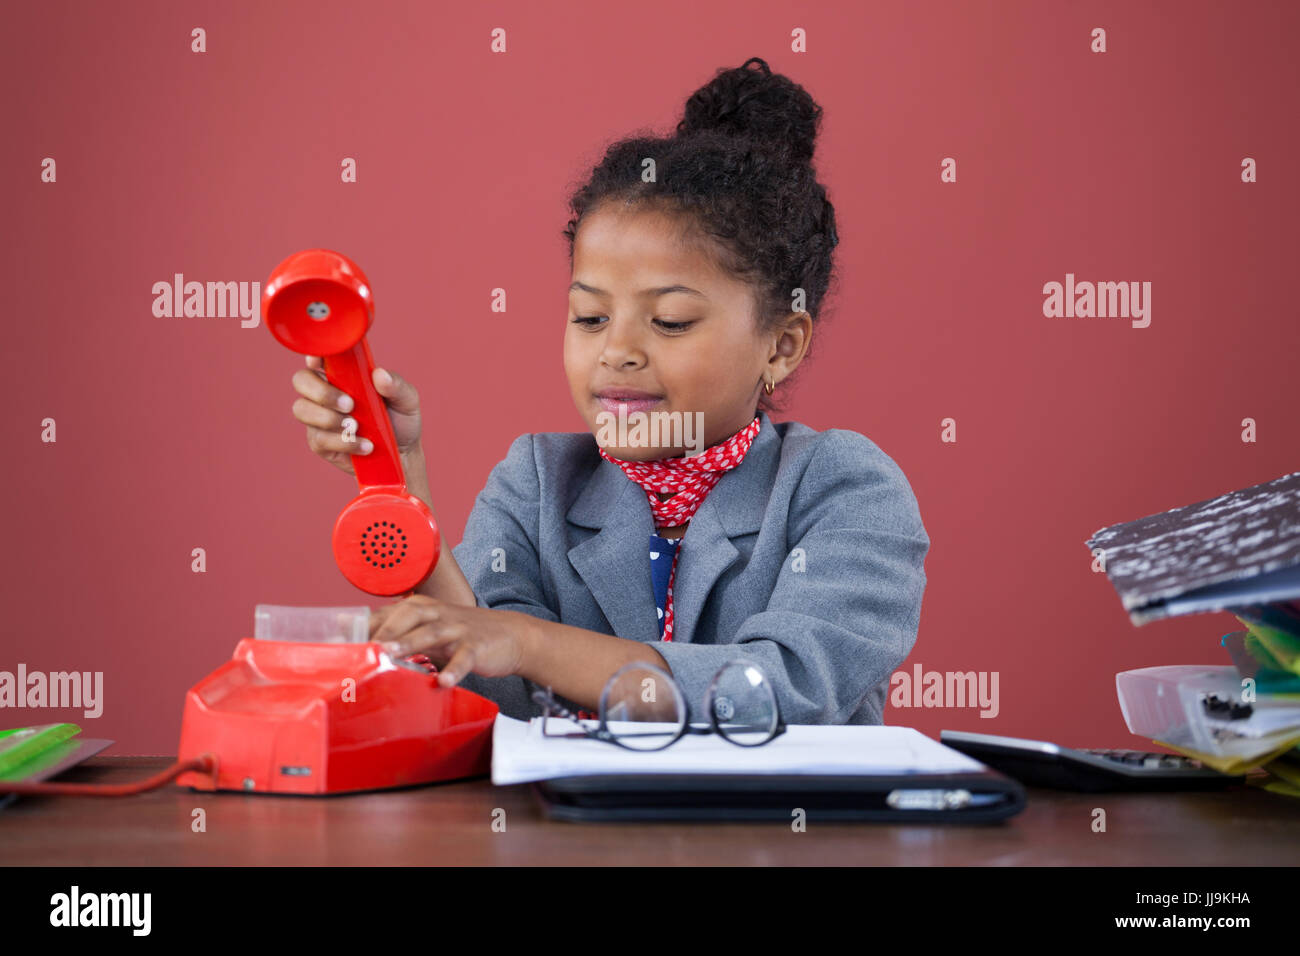 Businesswoman using land line phone while working at desk against orange background Stock Photo